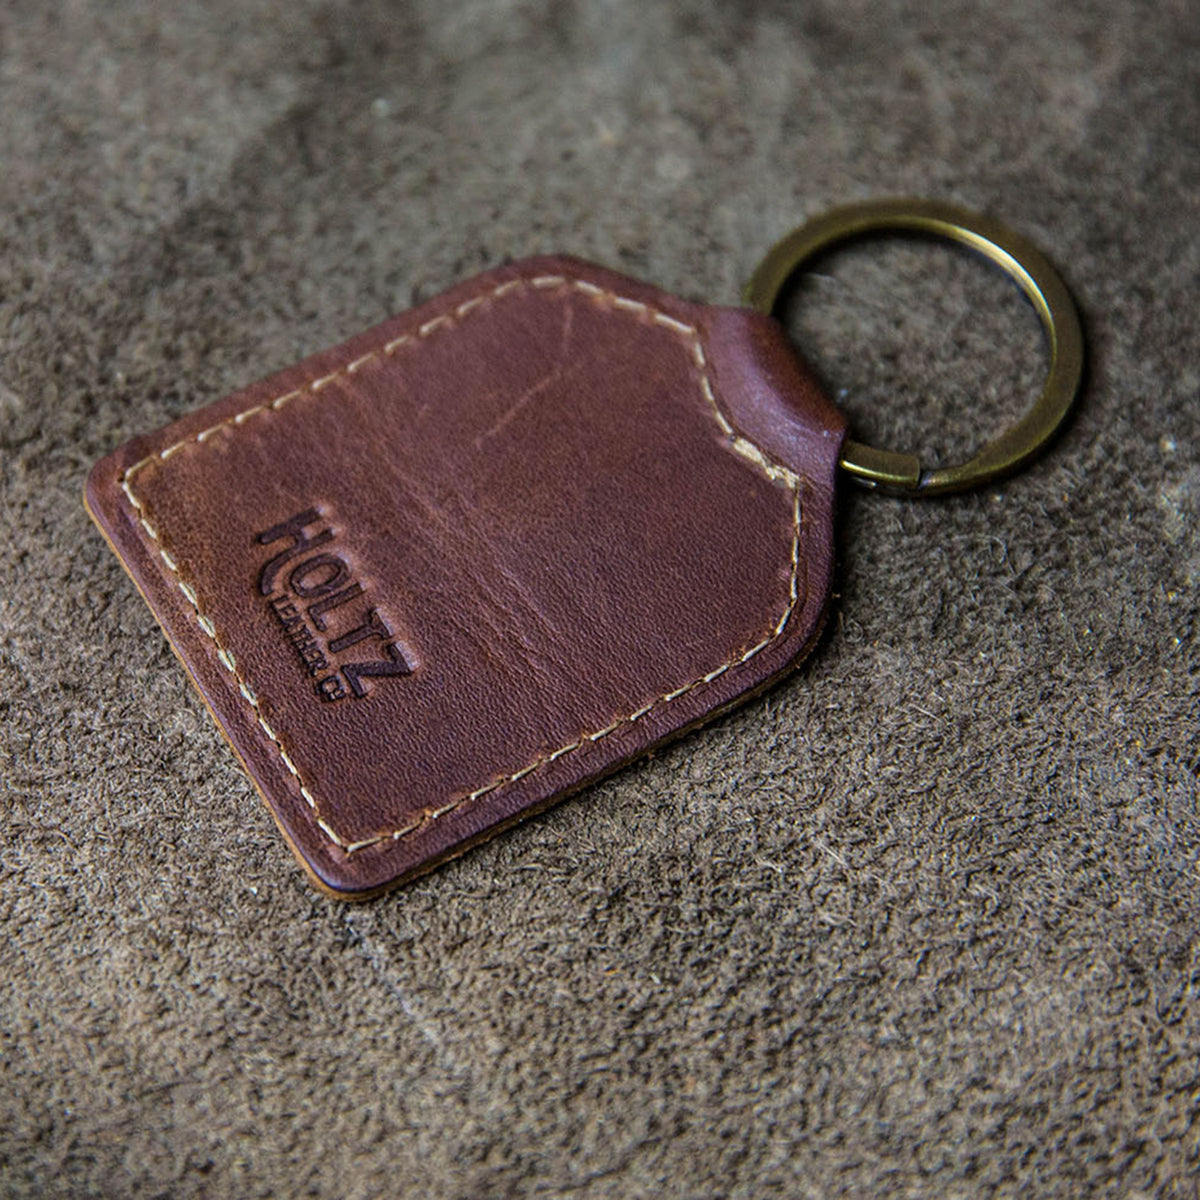 Bulk Promo Leather Keyrings  Branded and Corporate Leather Keyrings